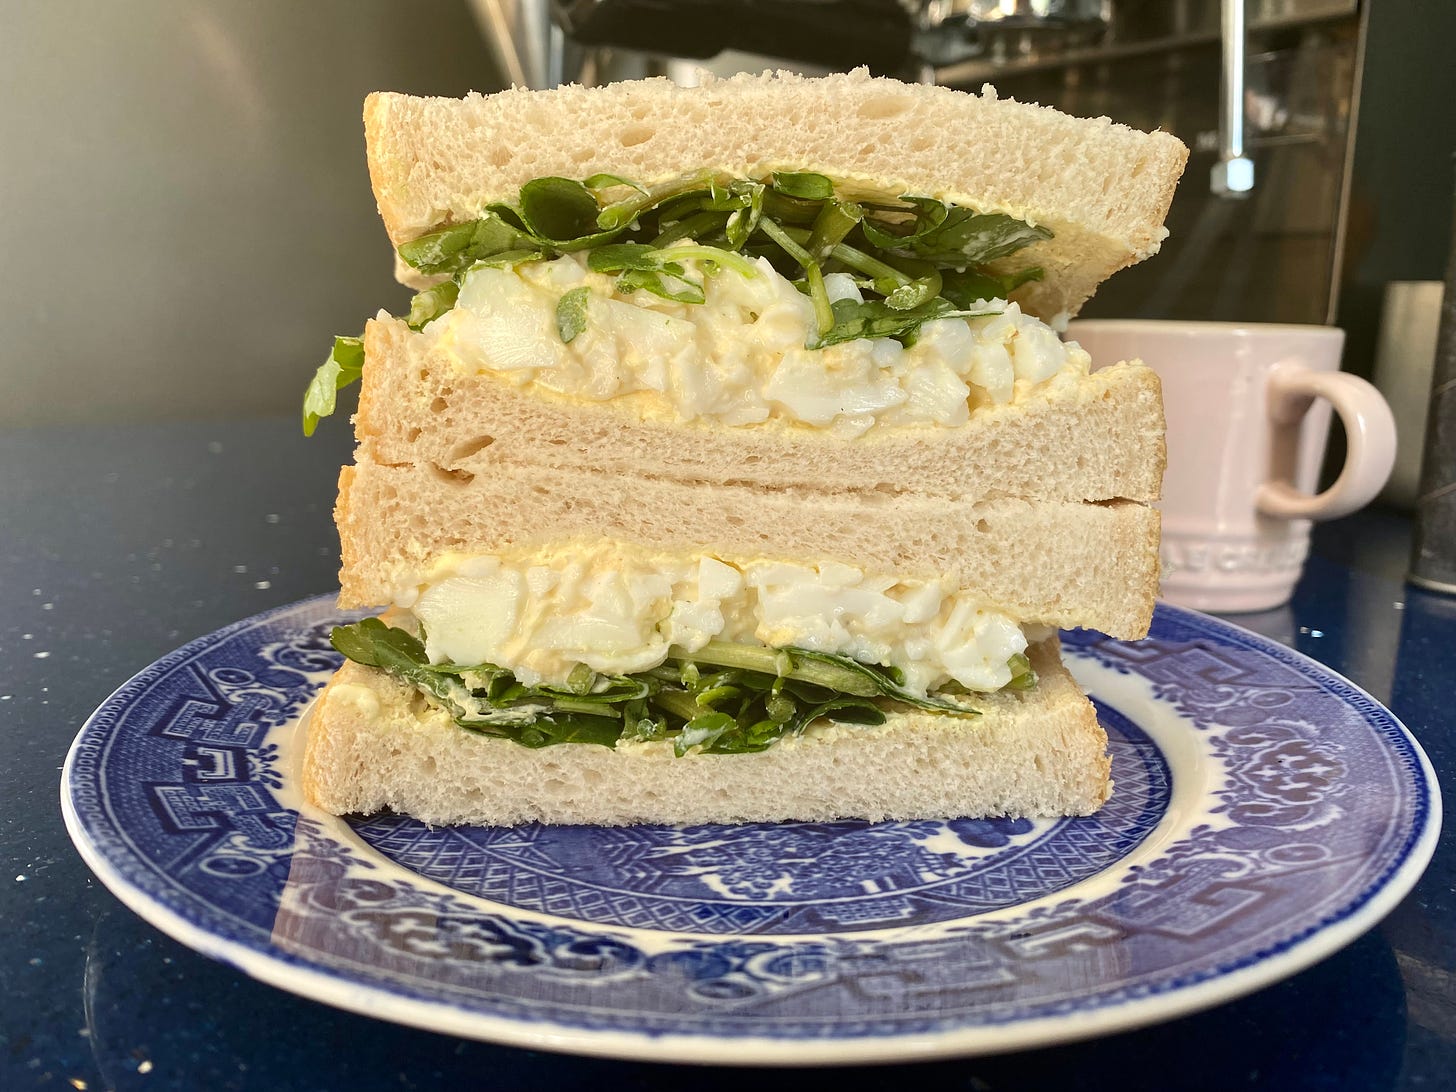 Cross section of an egg mayonnaise sandwich with salad on white bread. Sandwich is on a blue and white plate